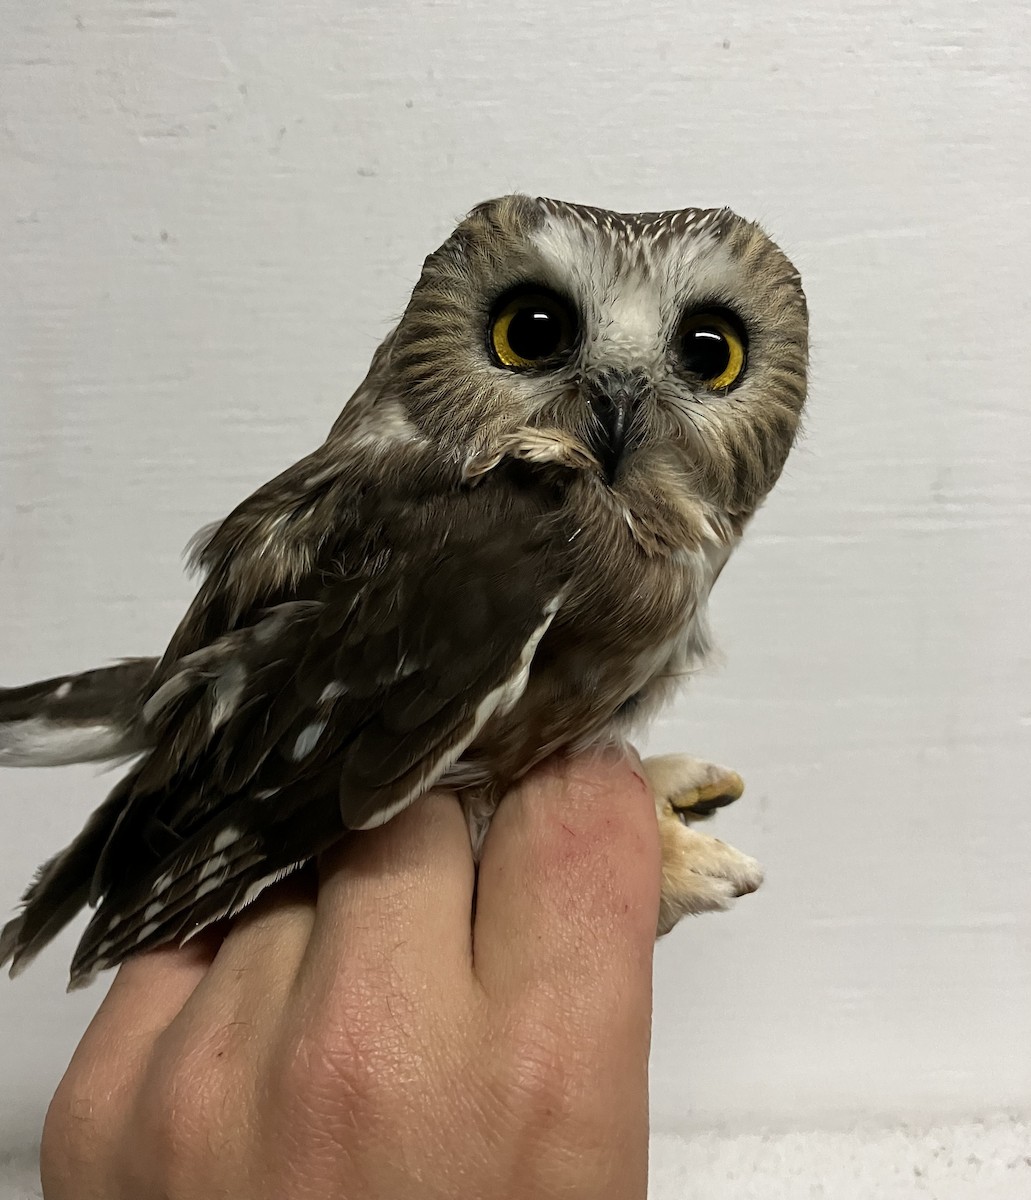 Northern Saw-whet Owl - Sachi Snively